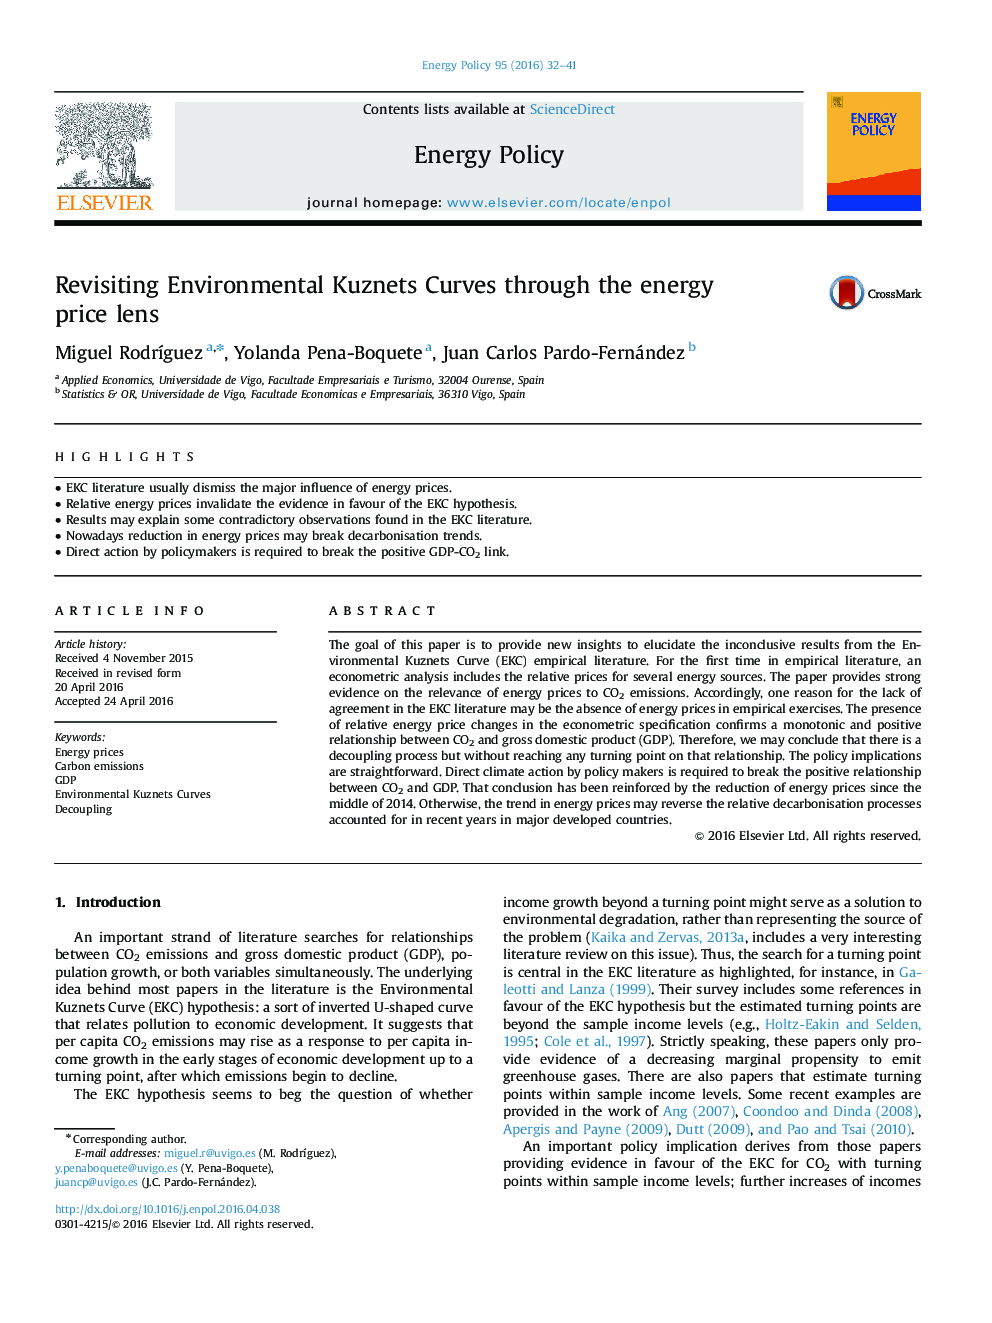 Revisiting Environmental Kuznets Curves through the energy price lens